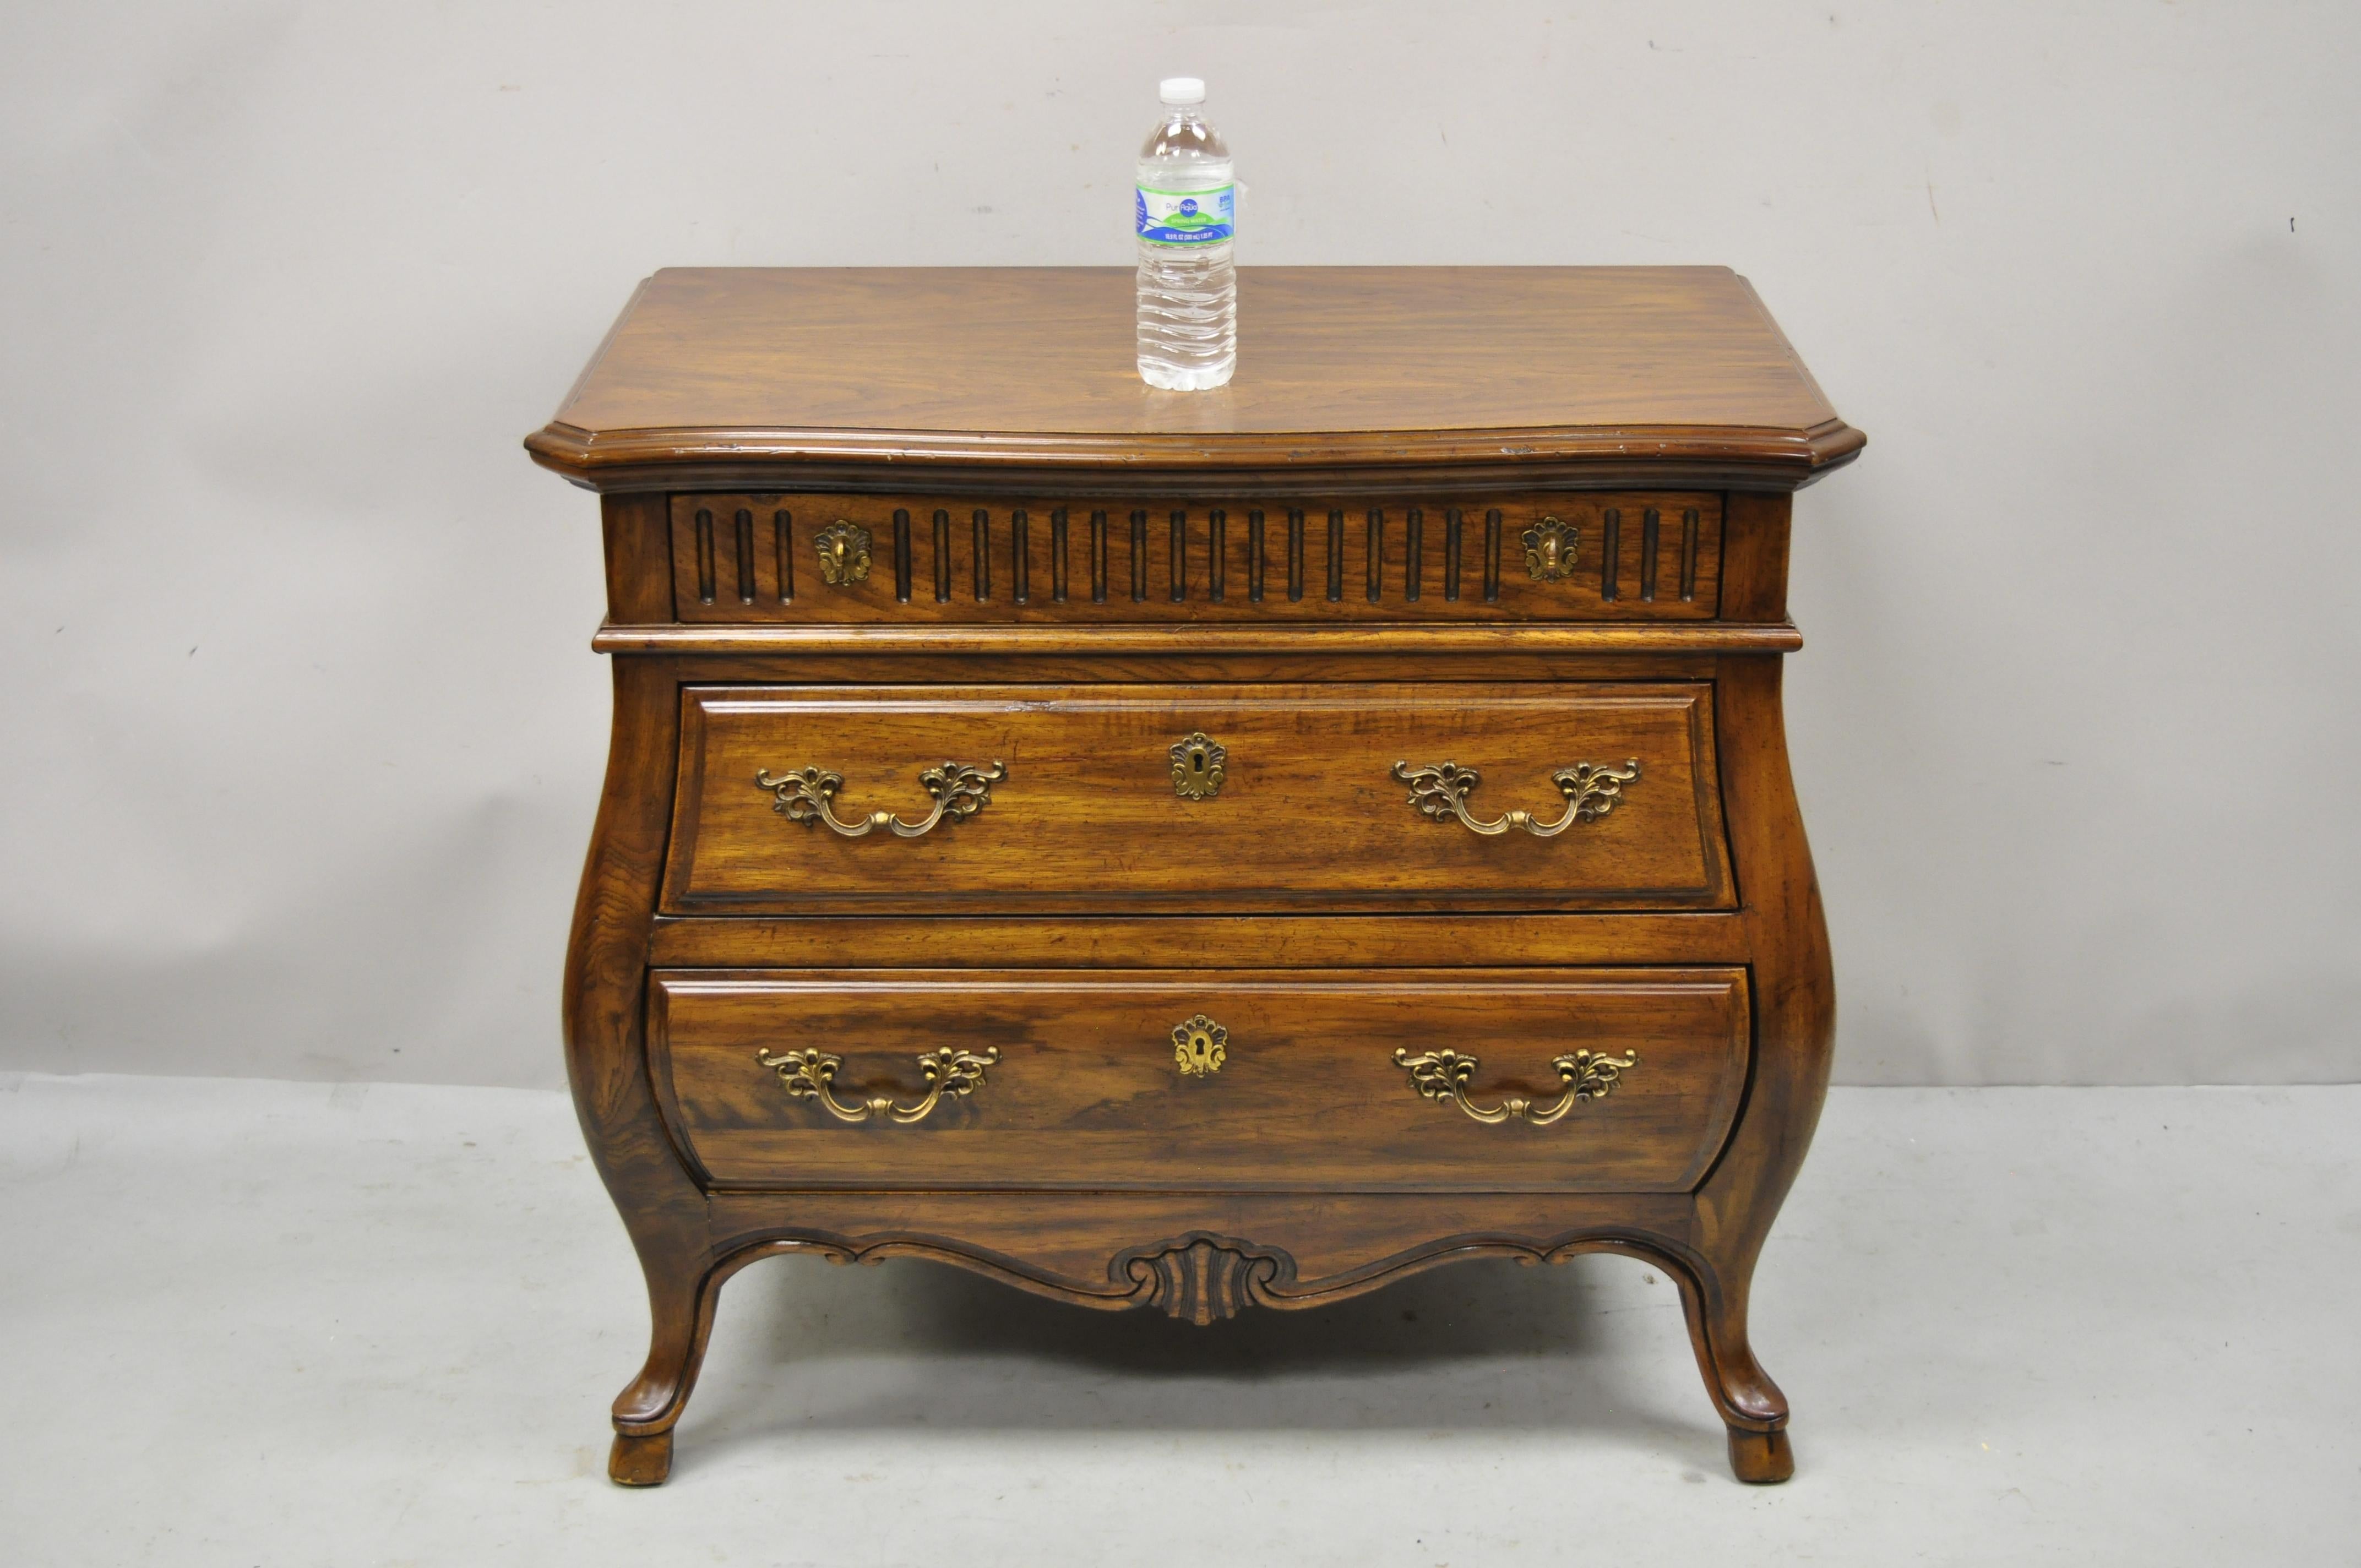 Drexel Grand Villa 3 drawer oak bombe commode chest nightstand dresser. Item features bombe form, solid wood construction, nicely carved details, original label, 3 drawers, cabriole legs, solid brass hardware, quality American craftsmanship, great